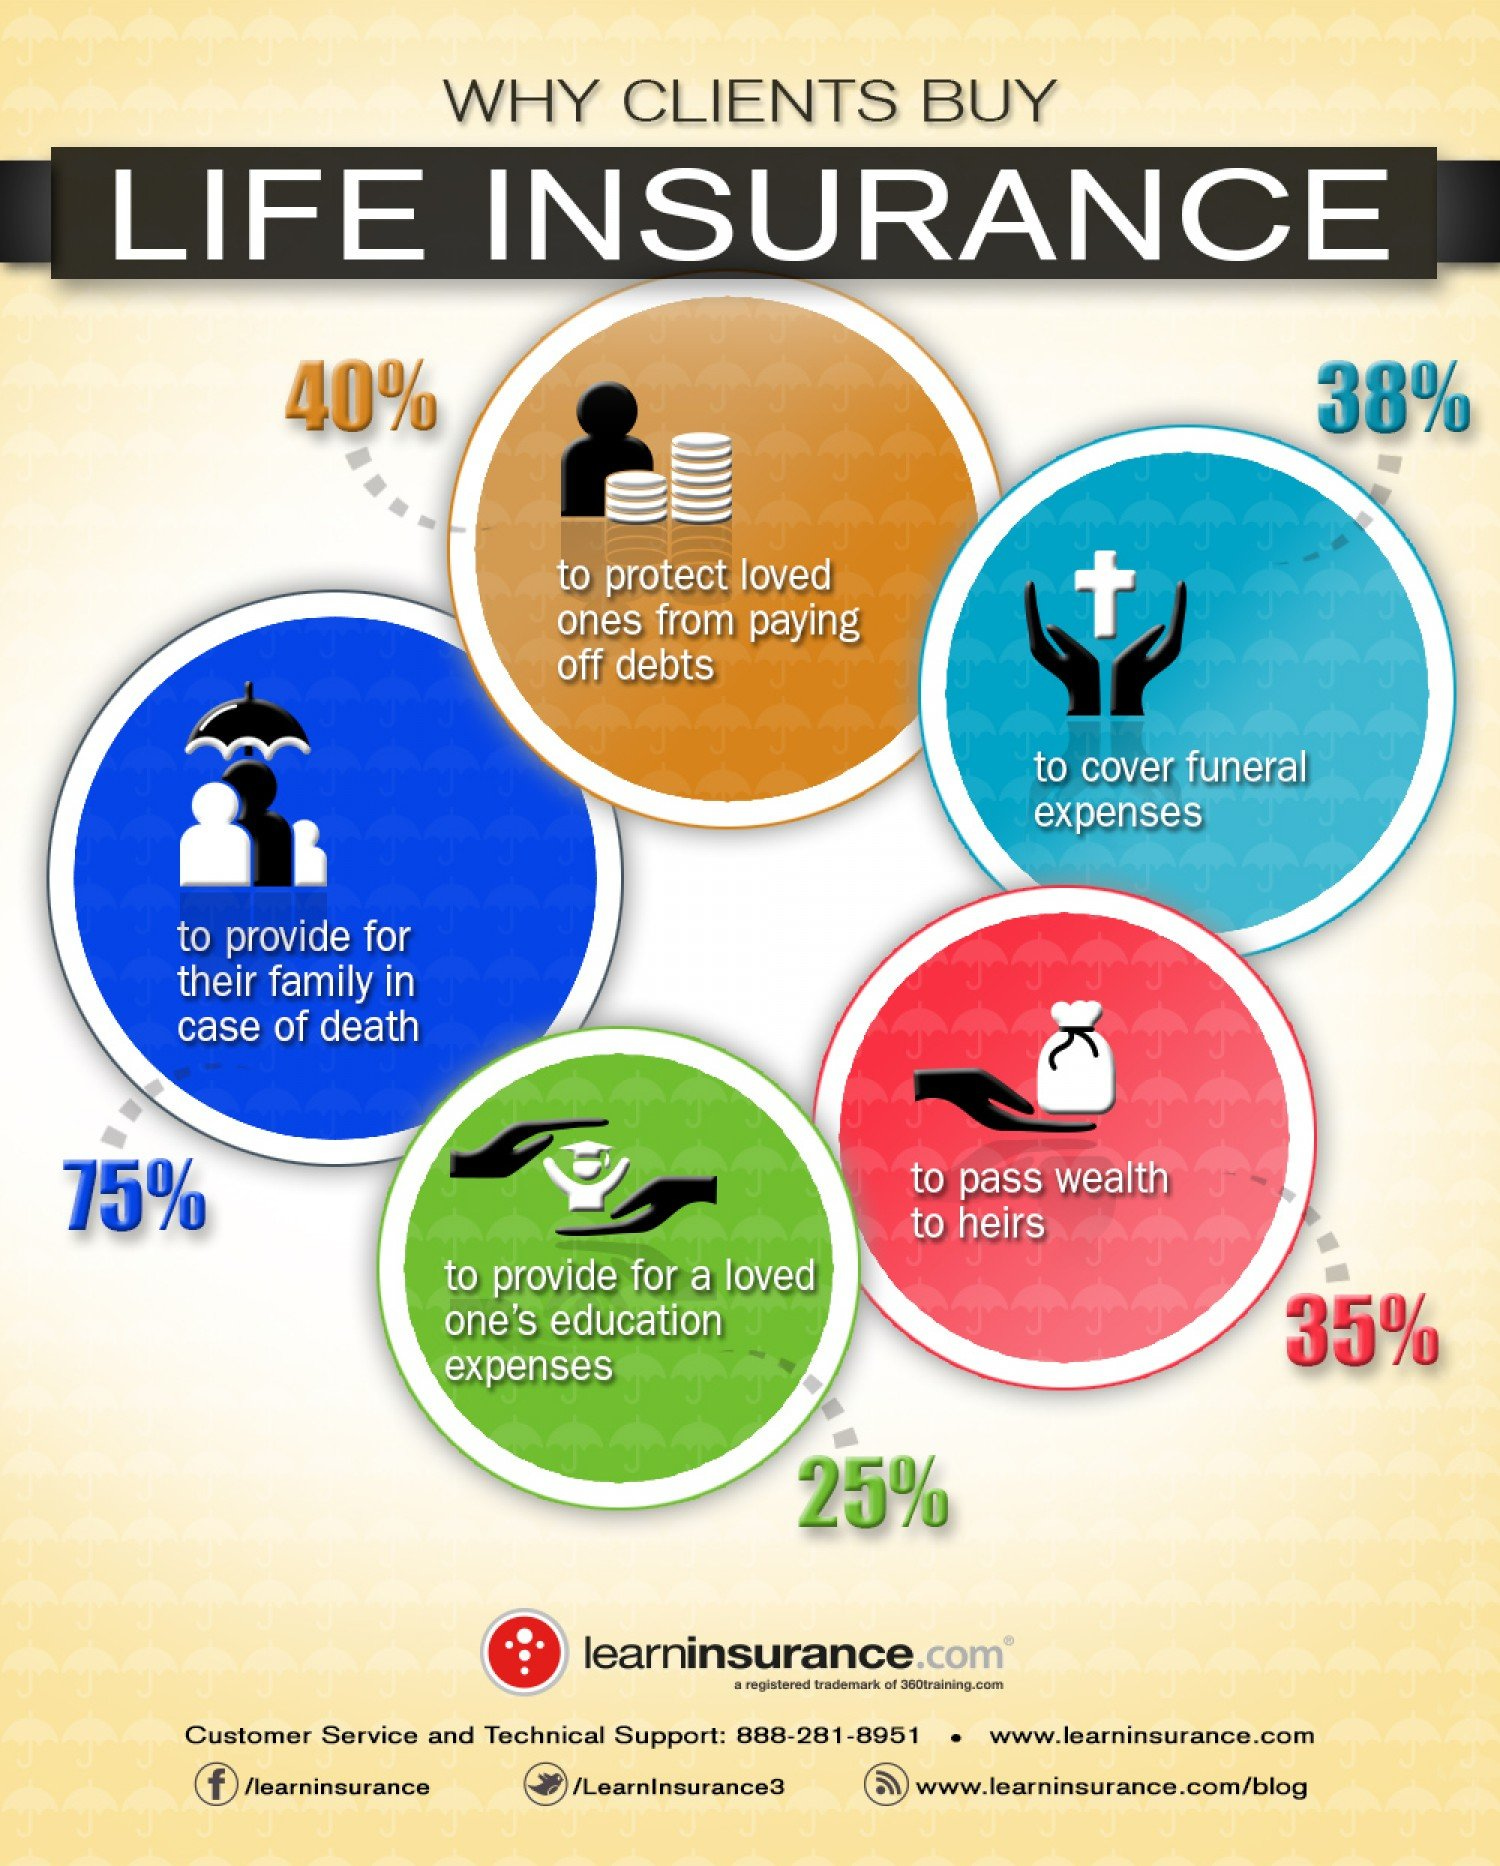 Are You Supposed To Use Life Insurance While You're Alive - Life ...